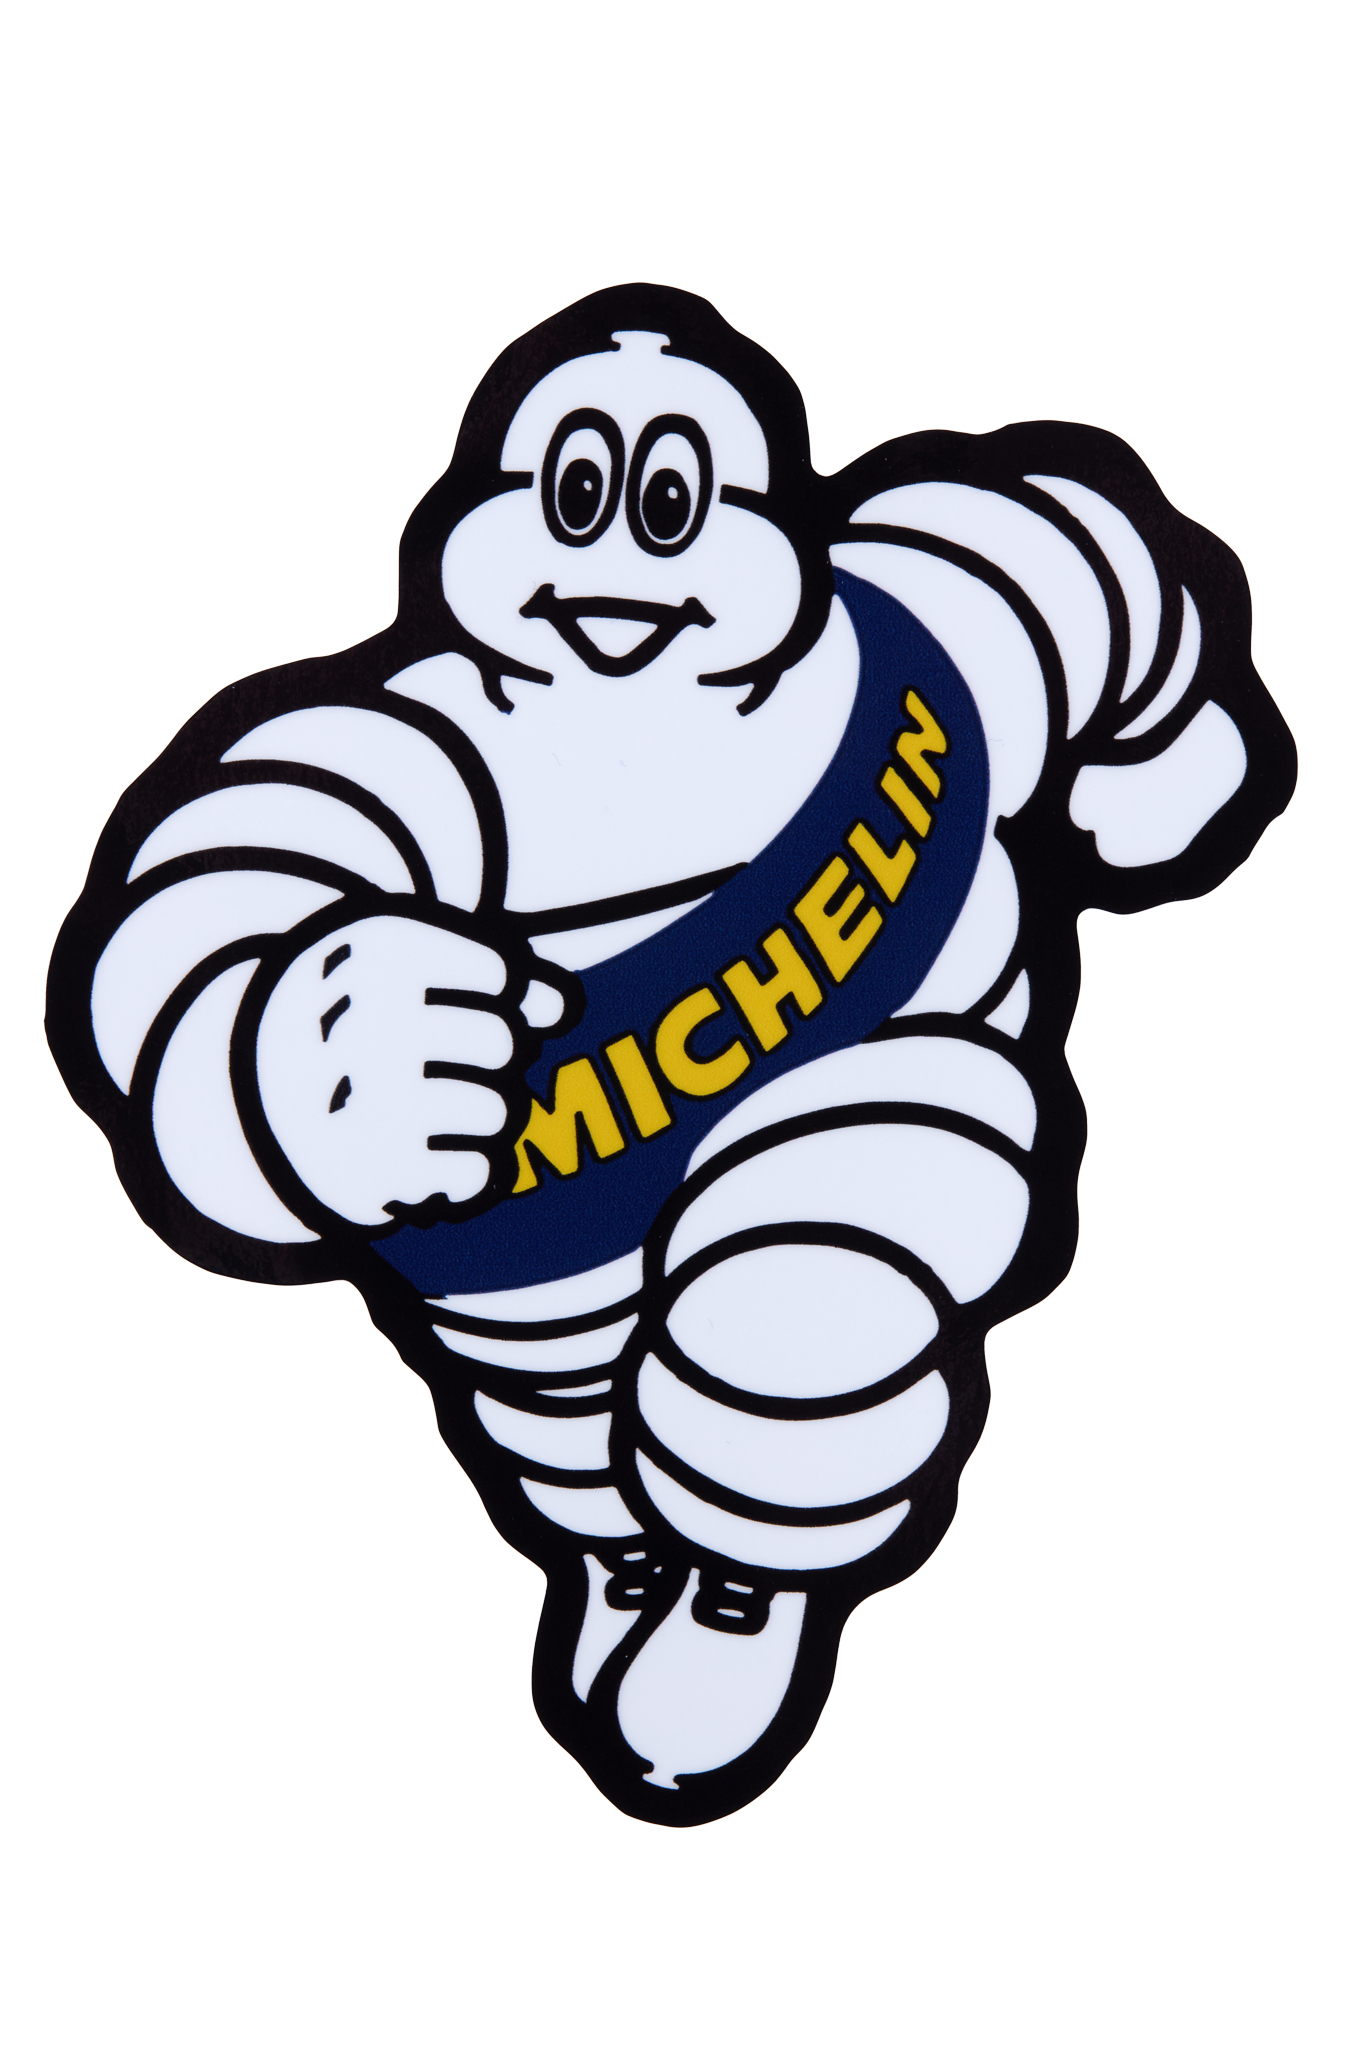 https://matro.be/media/image/2a/6a/72/michelin.png